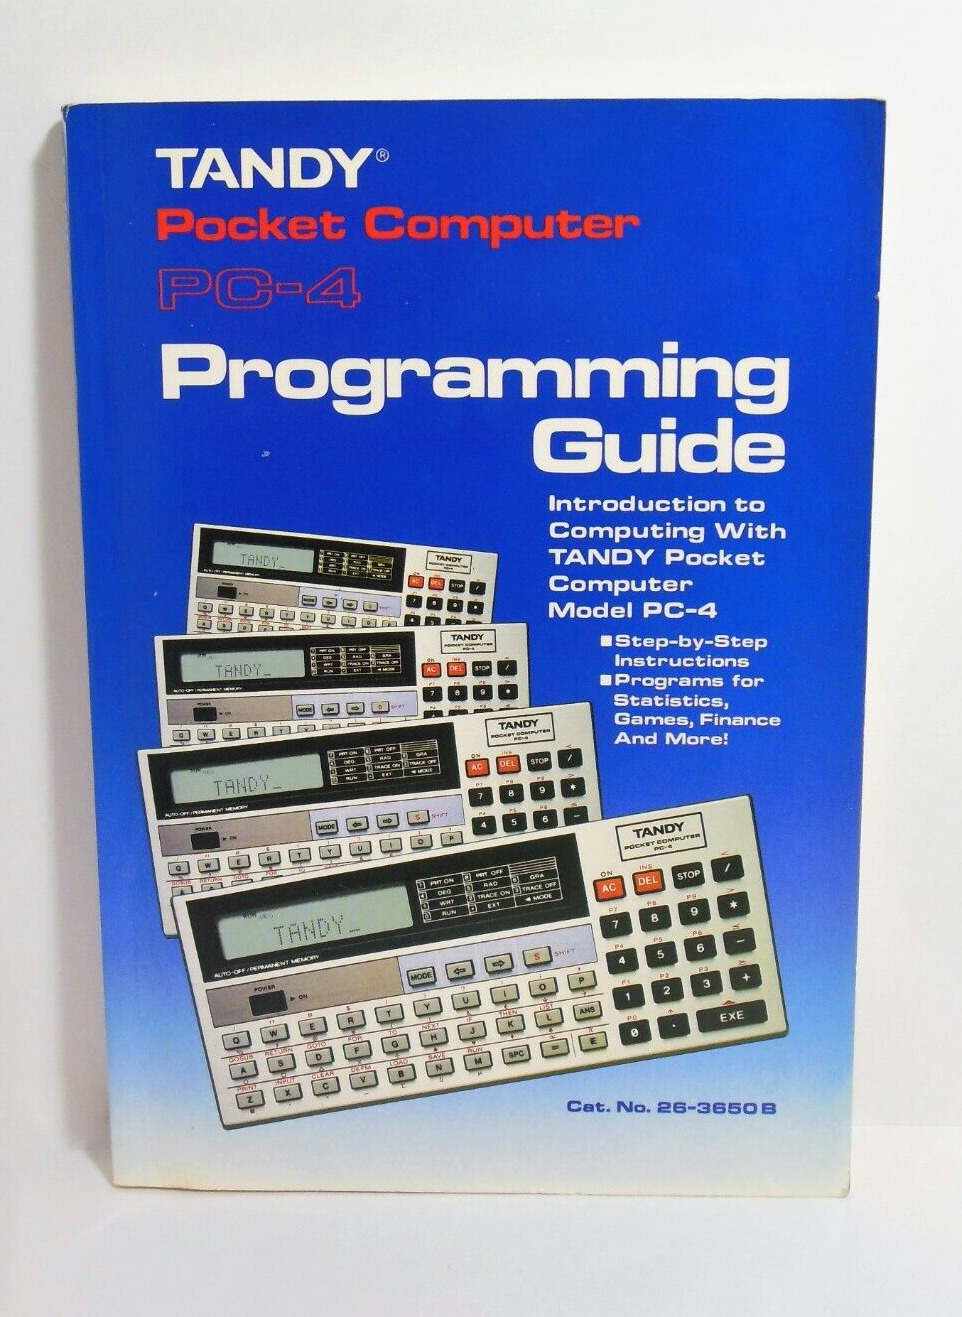 BOOK ONLY Tandy PC-4 Pocket Computer Programming Guide 1985 26-3650 B Vintage VG